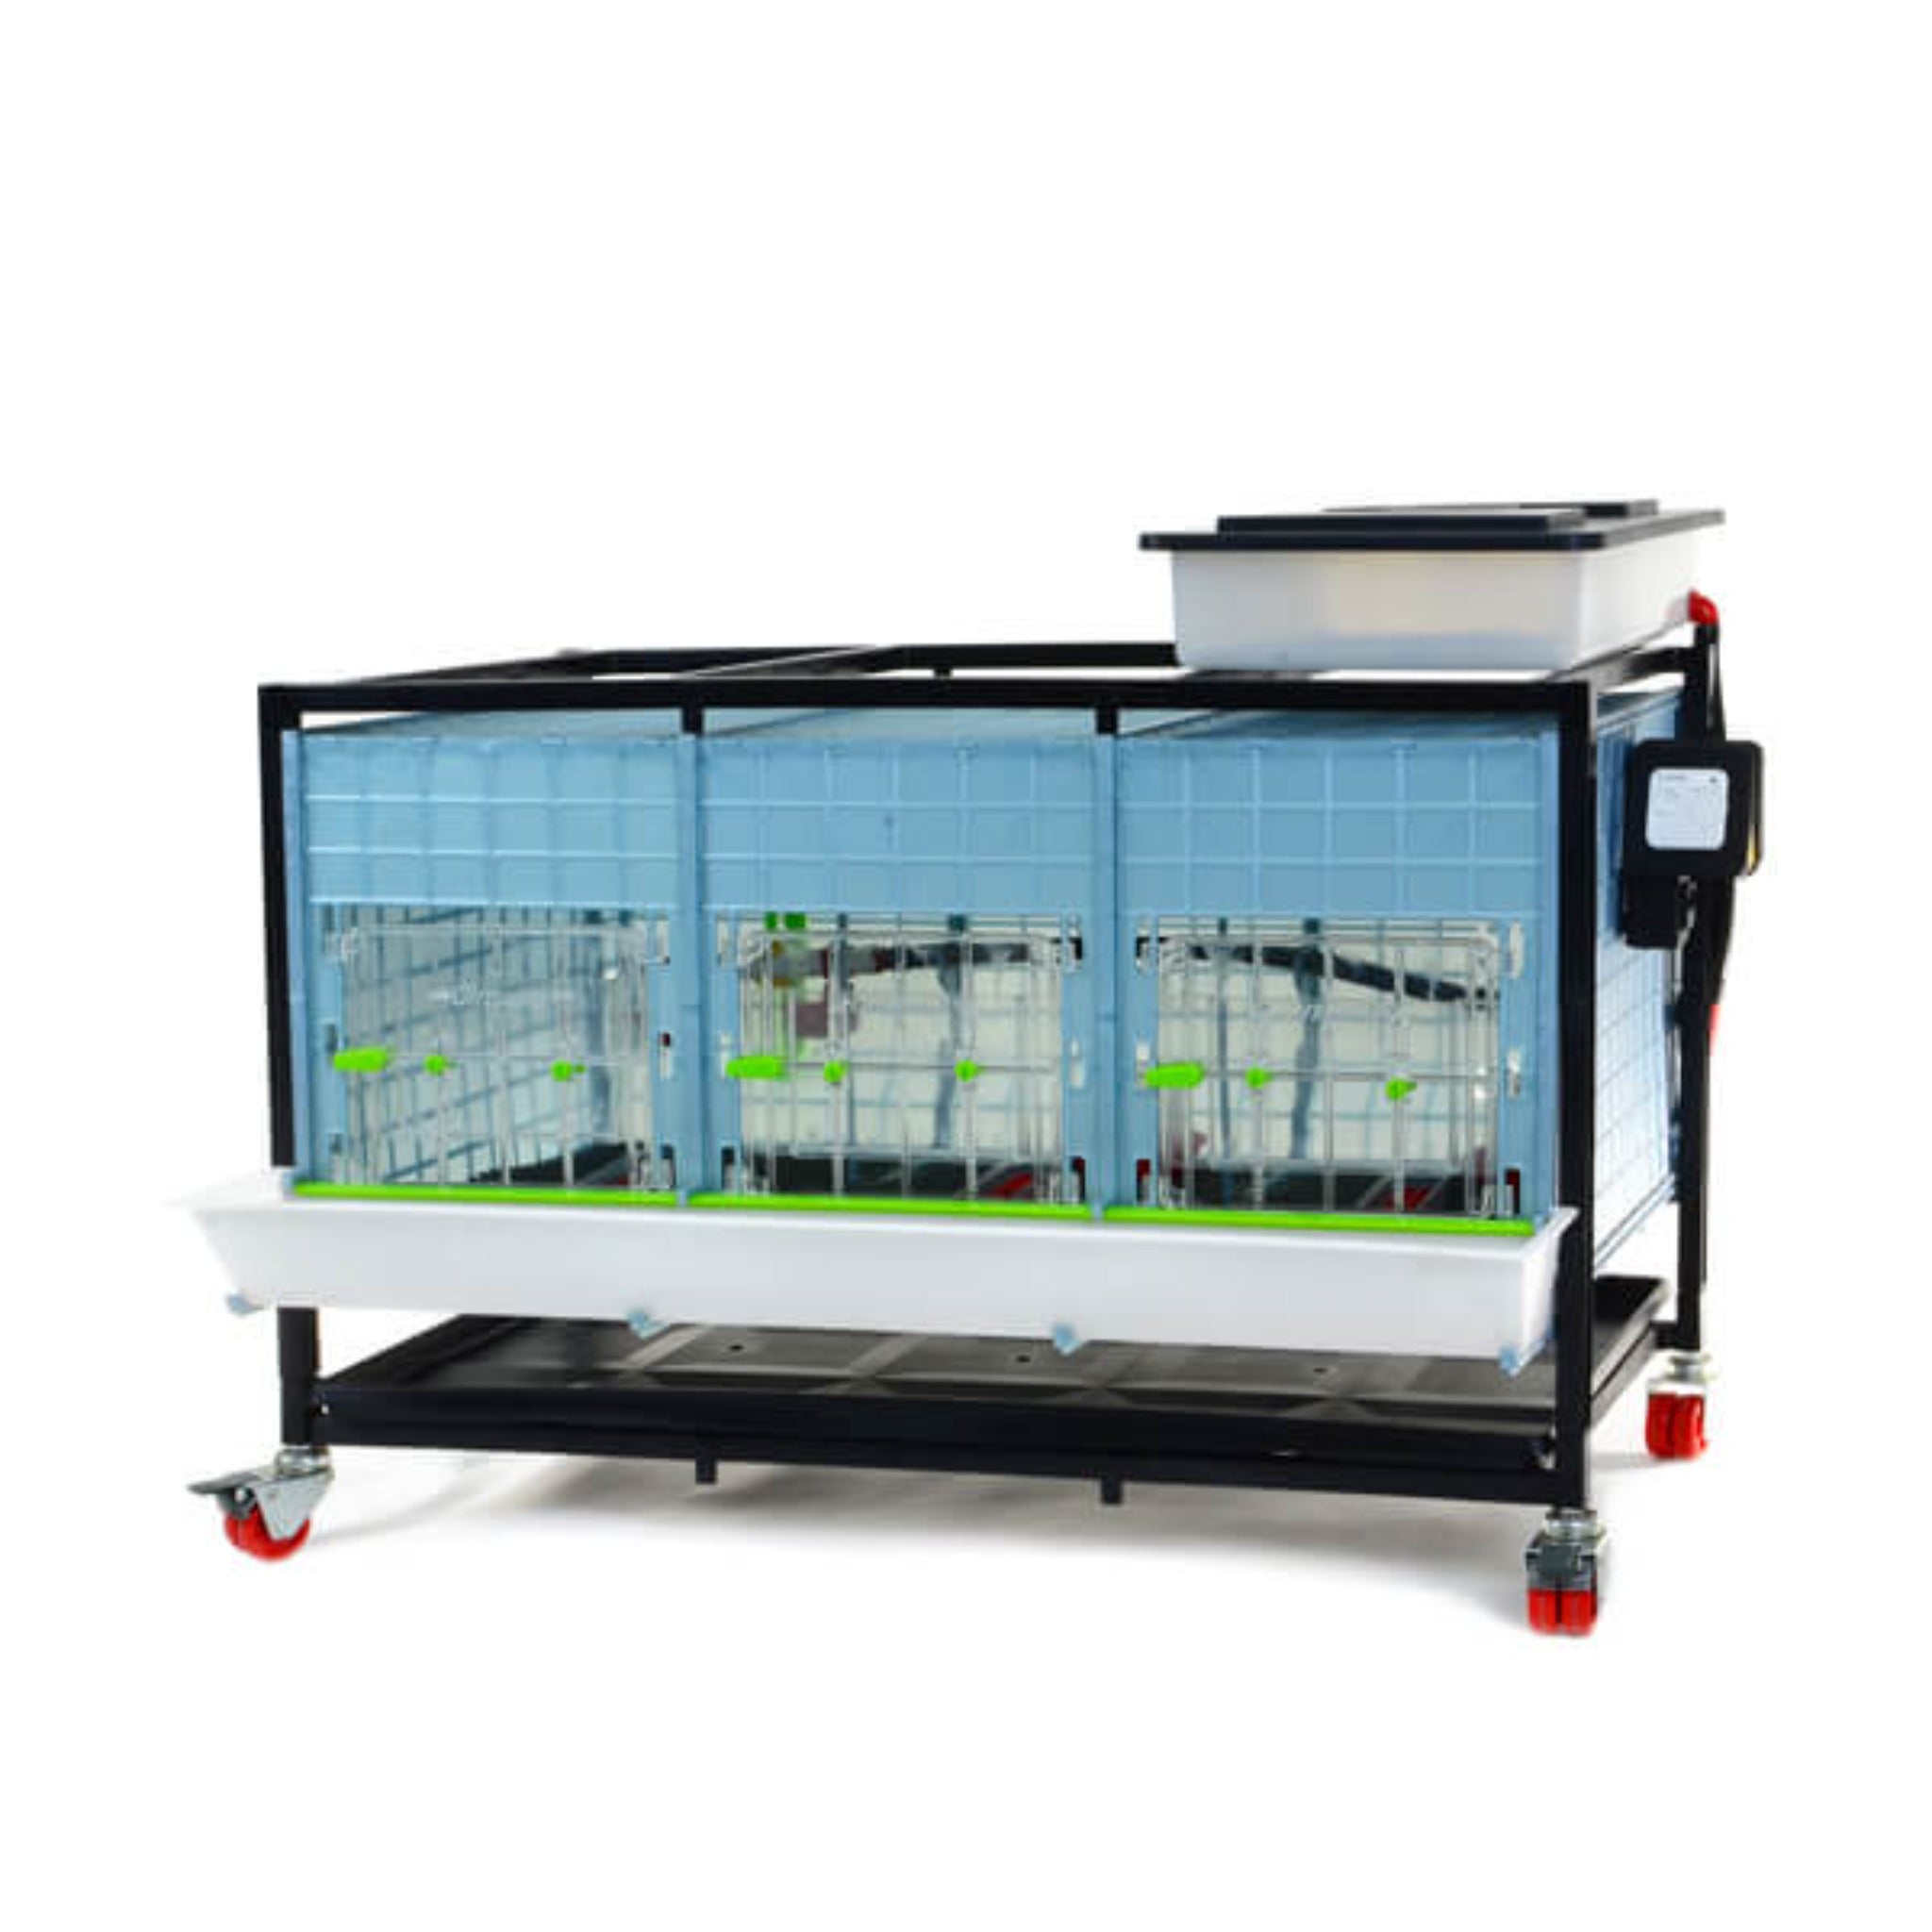 Hatching Time Cimuka 1 Layer 15 Inch Brooder front visible. Feeding trough is located on front of brooders. Clear plastic doors with locks can be seen. Heater thermostat visible on side of brooders. Brooders are on Metal frame with rolling casters for mobility.